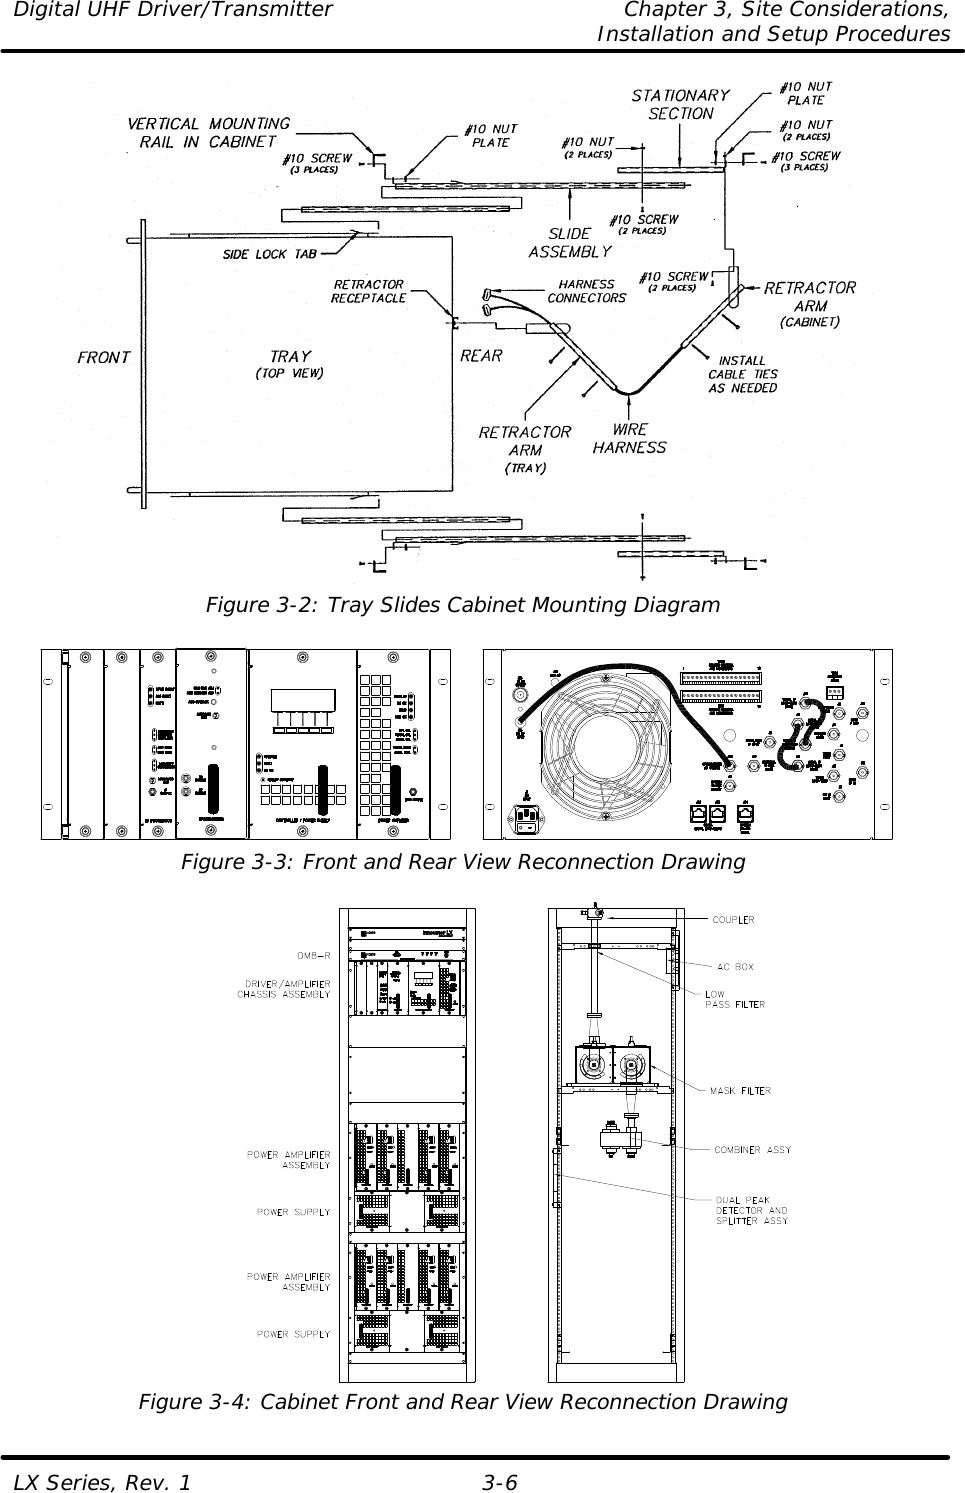 Digital UHF Driver/Transmitter Chapter 3, Site Considerations,   Installation and Setup Procedures  LX Series, Rev. 1 3-6  Figure 3-2: Tray Slides Cabinet Mounting Diagram   Figure 3-3: Front and Rear View Reconnection Drawing   Figure 3-4: Cabinet Front and Rear View Reconnection Drawing  